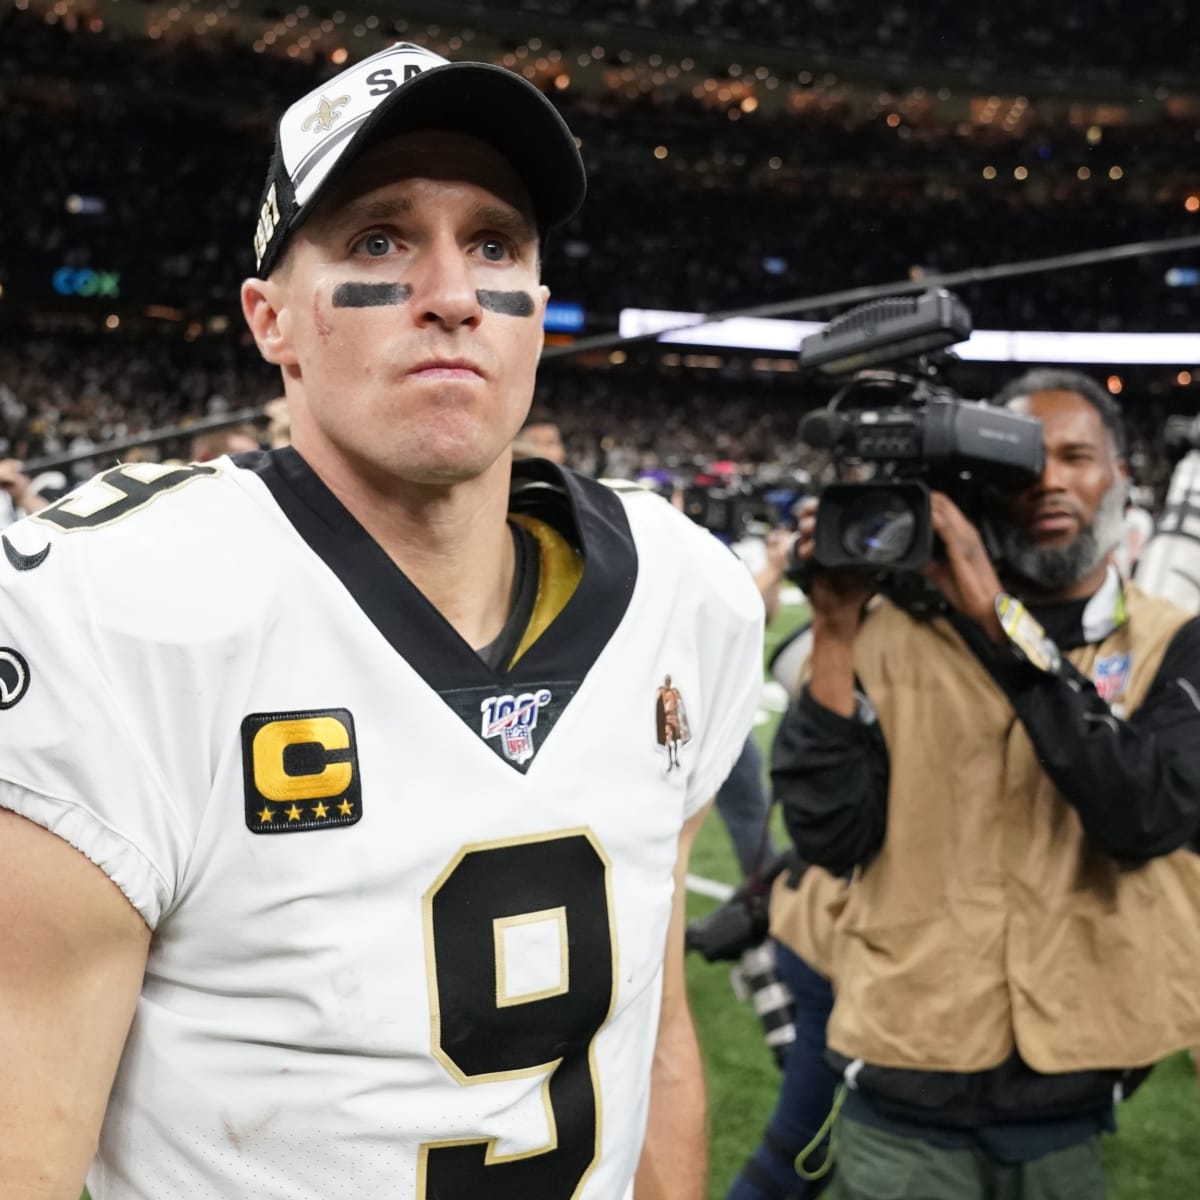 Drew Brees backtracks on years-old comments on kneeling during anthem